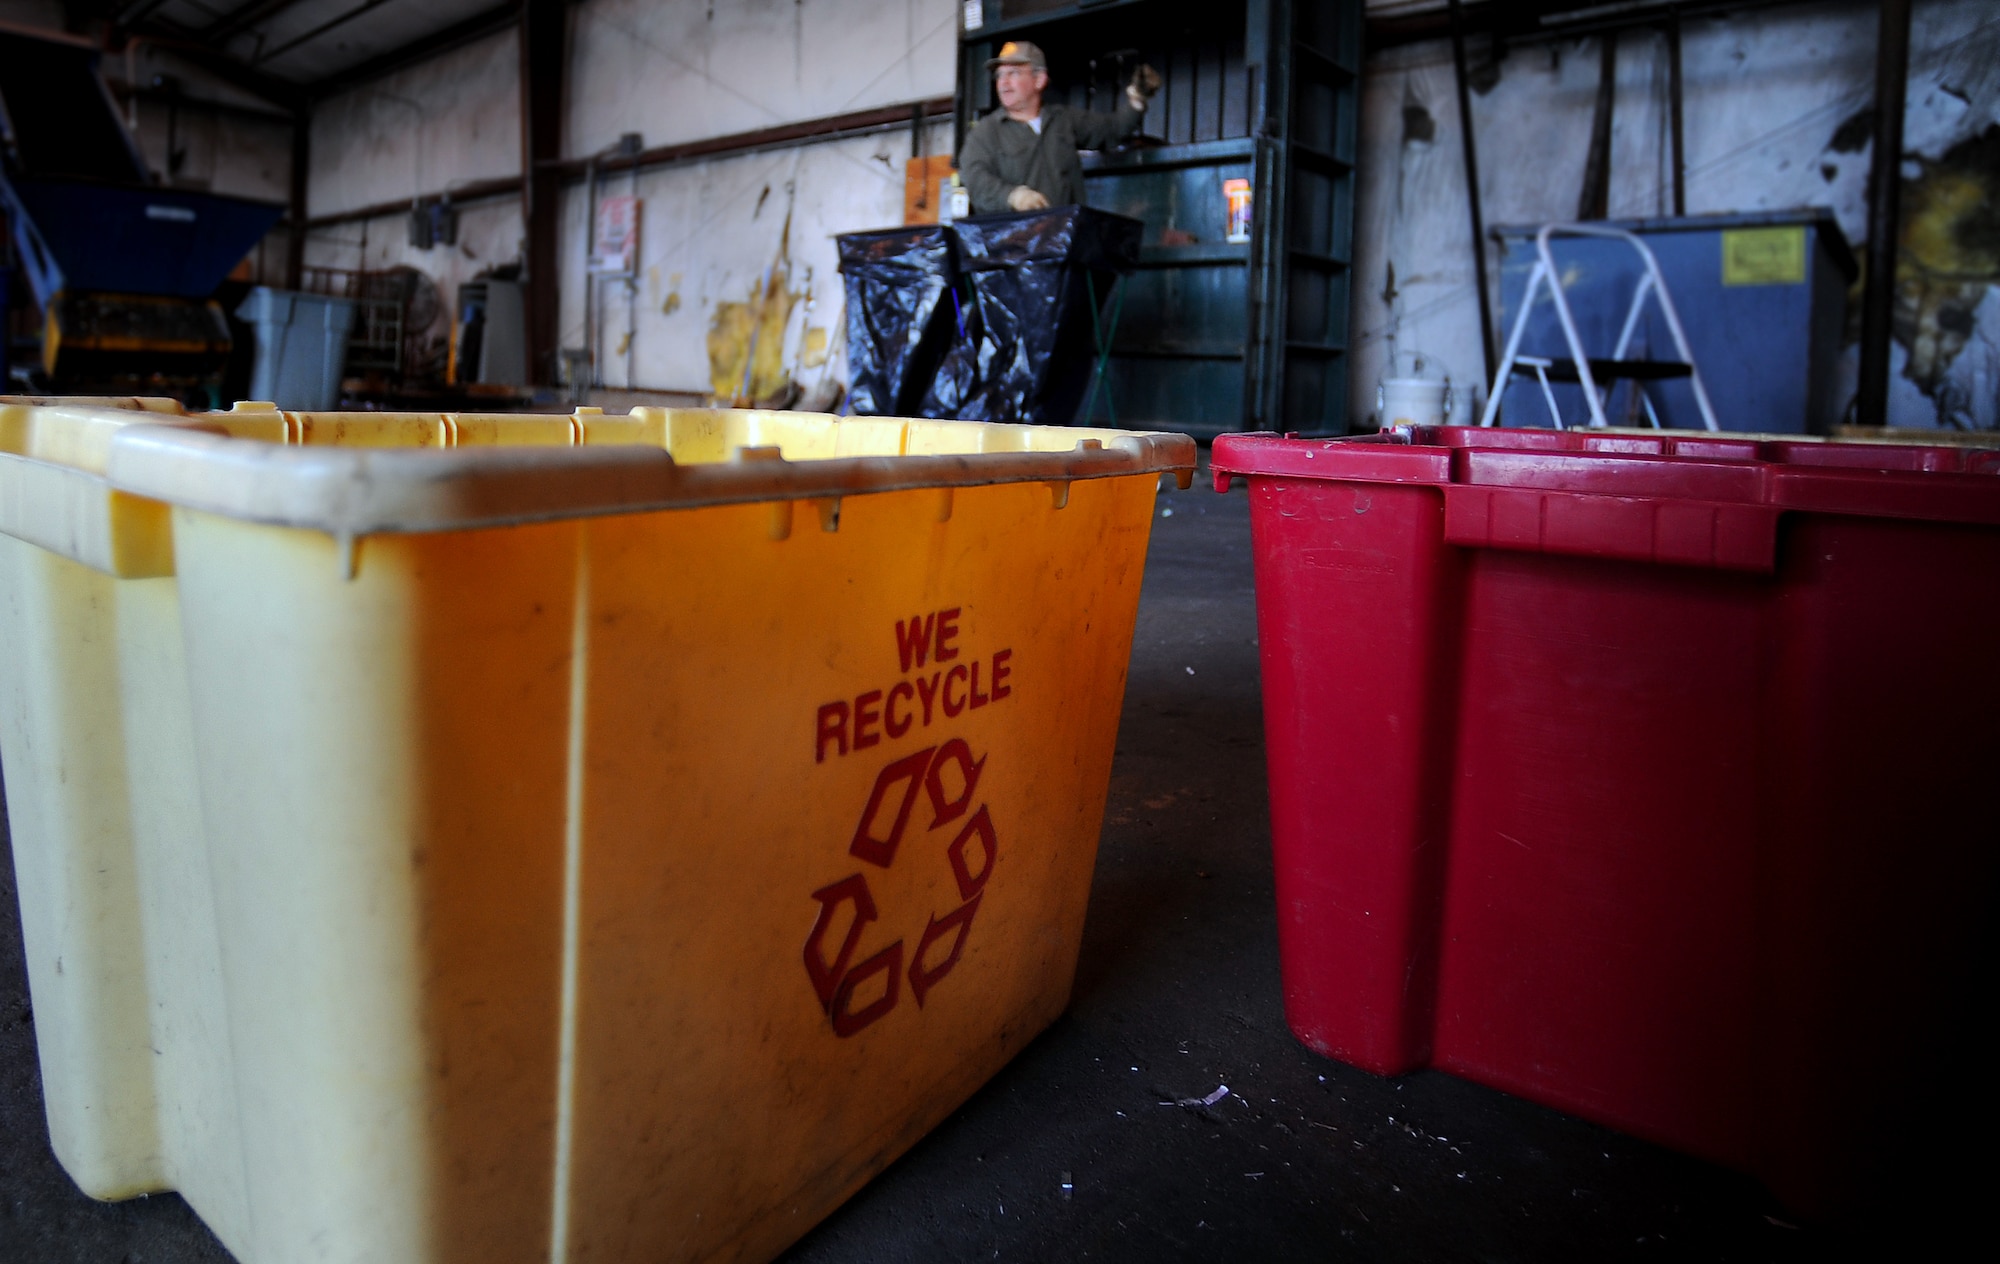 WHITEMAN AIR FORCE BASE, Mo. -- Recycling bins are set in place as members of the Whiteman Recycling Center prepare to sort out recyclables April 11, 2011. The recycling center accepts materials from paper and aluminum to plastic. For each category of recyclable material there are different sections that should be separated, such as colored and clear plastics. (U.S. Air Force photo by Senior Airman Kenny Holston)(Released)  


